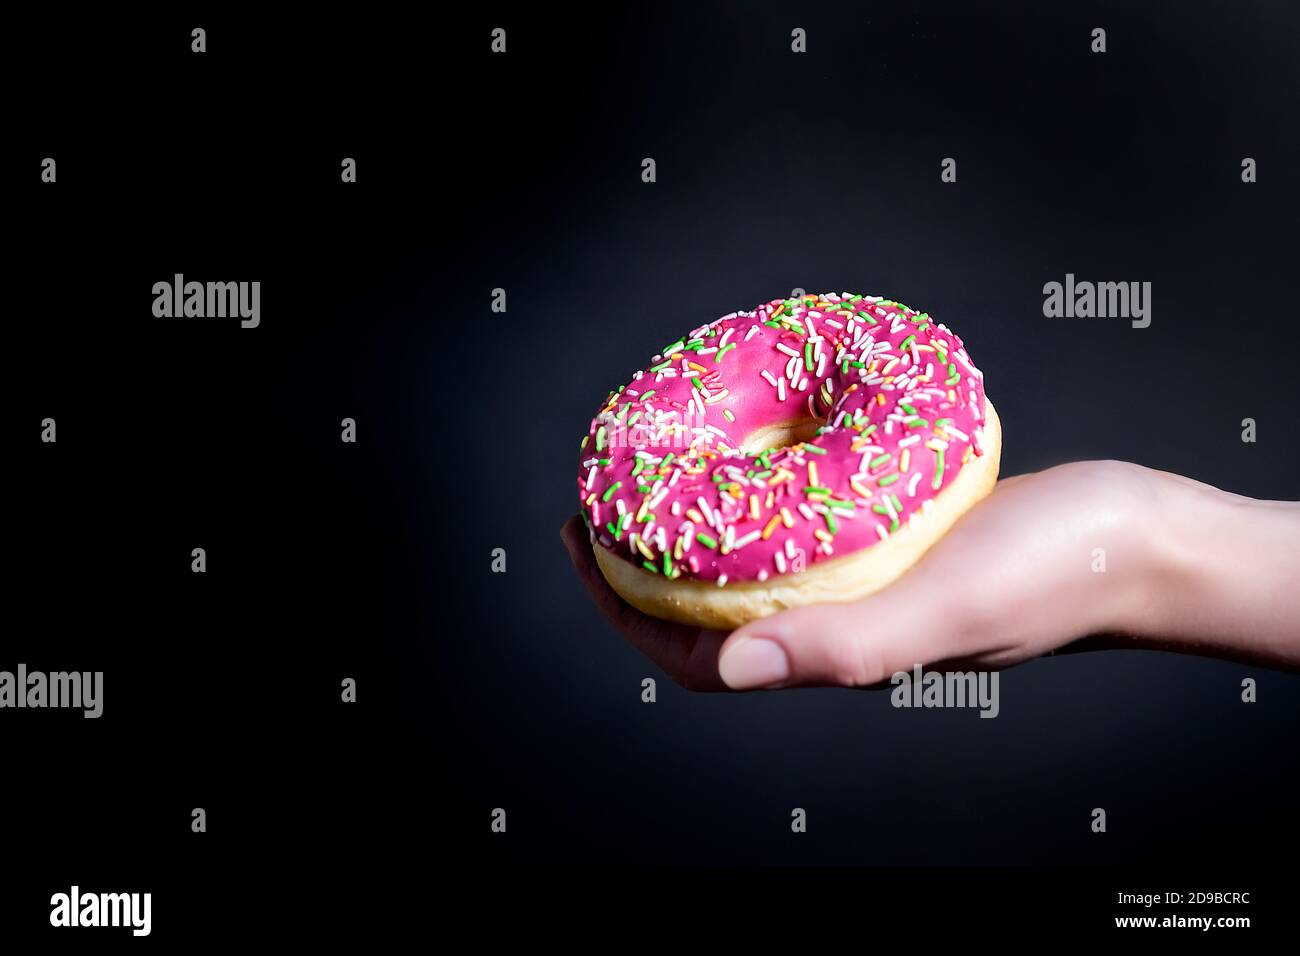 Donut on a dark background. Donut with pink frosting. The cook's hand holds  a pink doughnut. Selective focus. Close up Stock Photo - Alamy